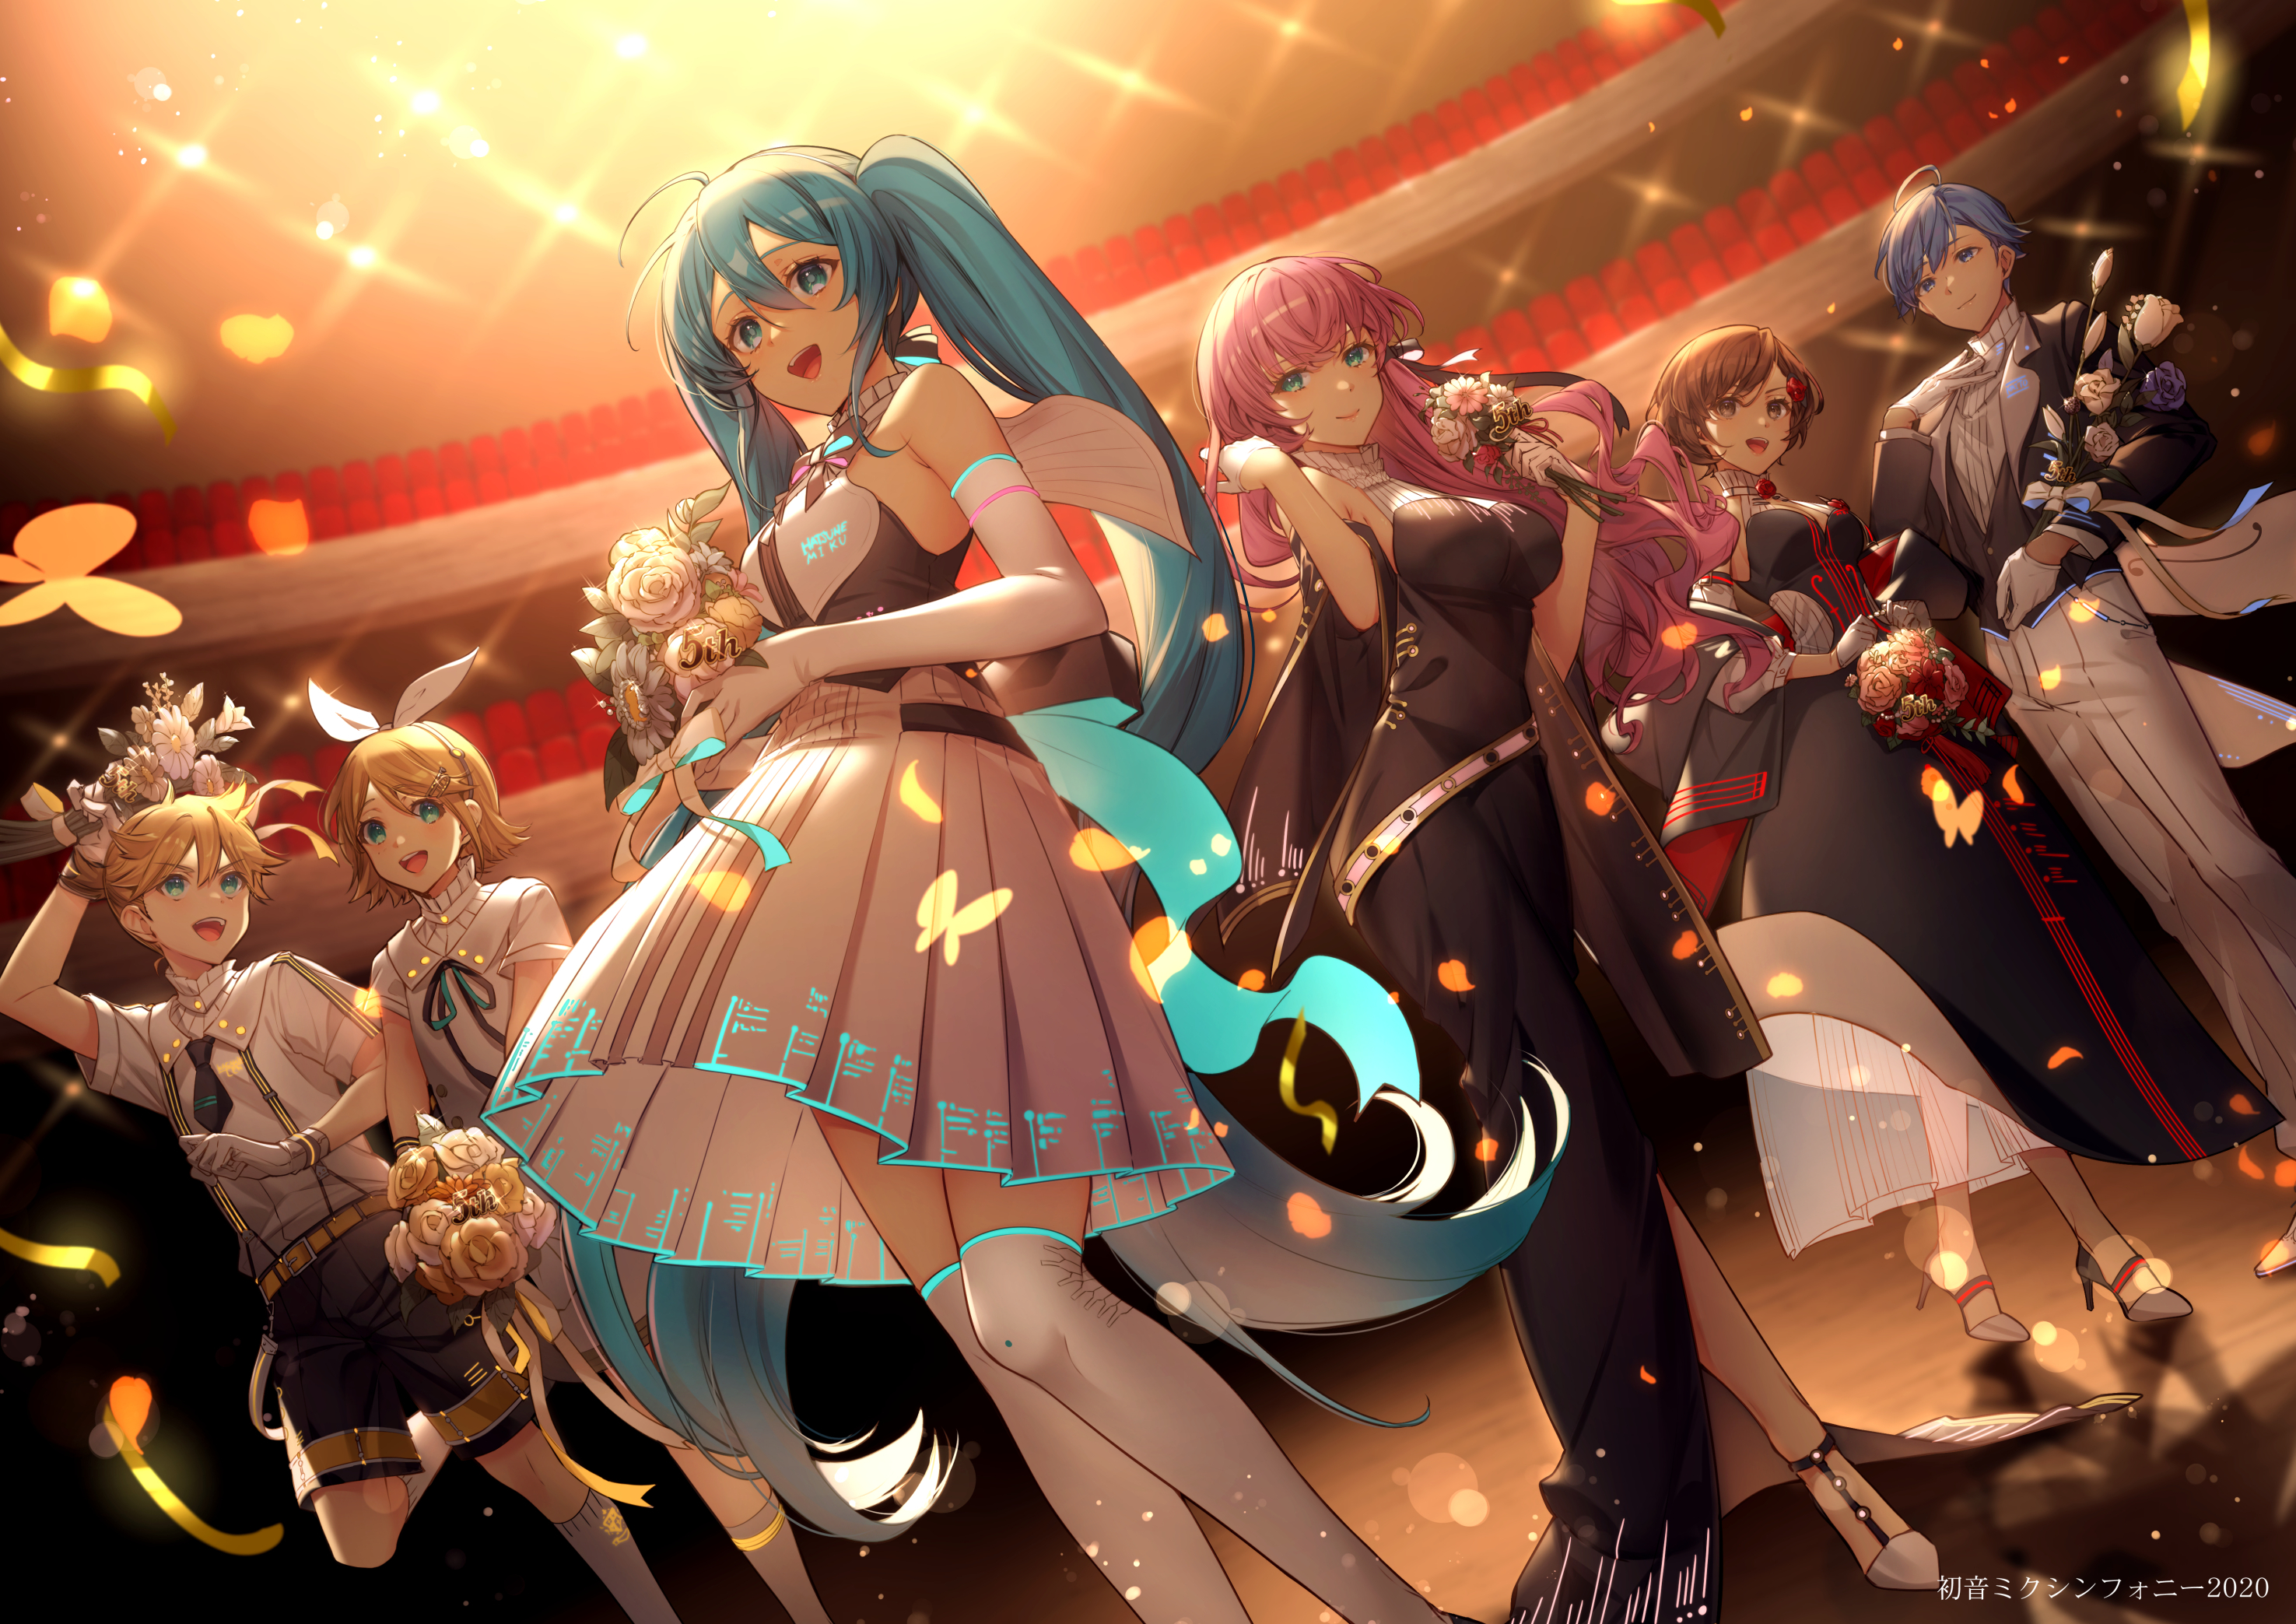 Vocaloid Girl Group Wallpaper Hd Anime 4k Wallpapers Images Photos And Background Wallpapers Den